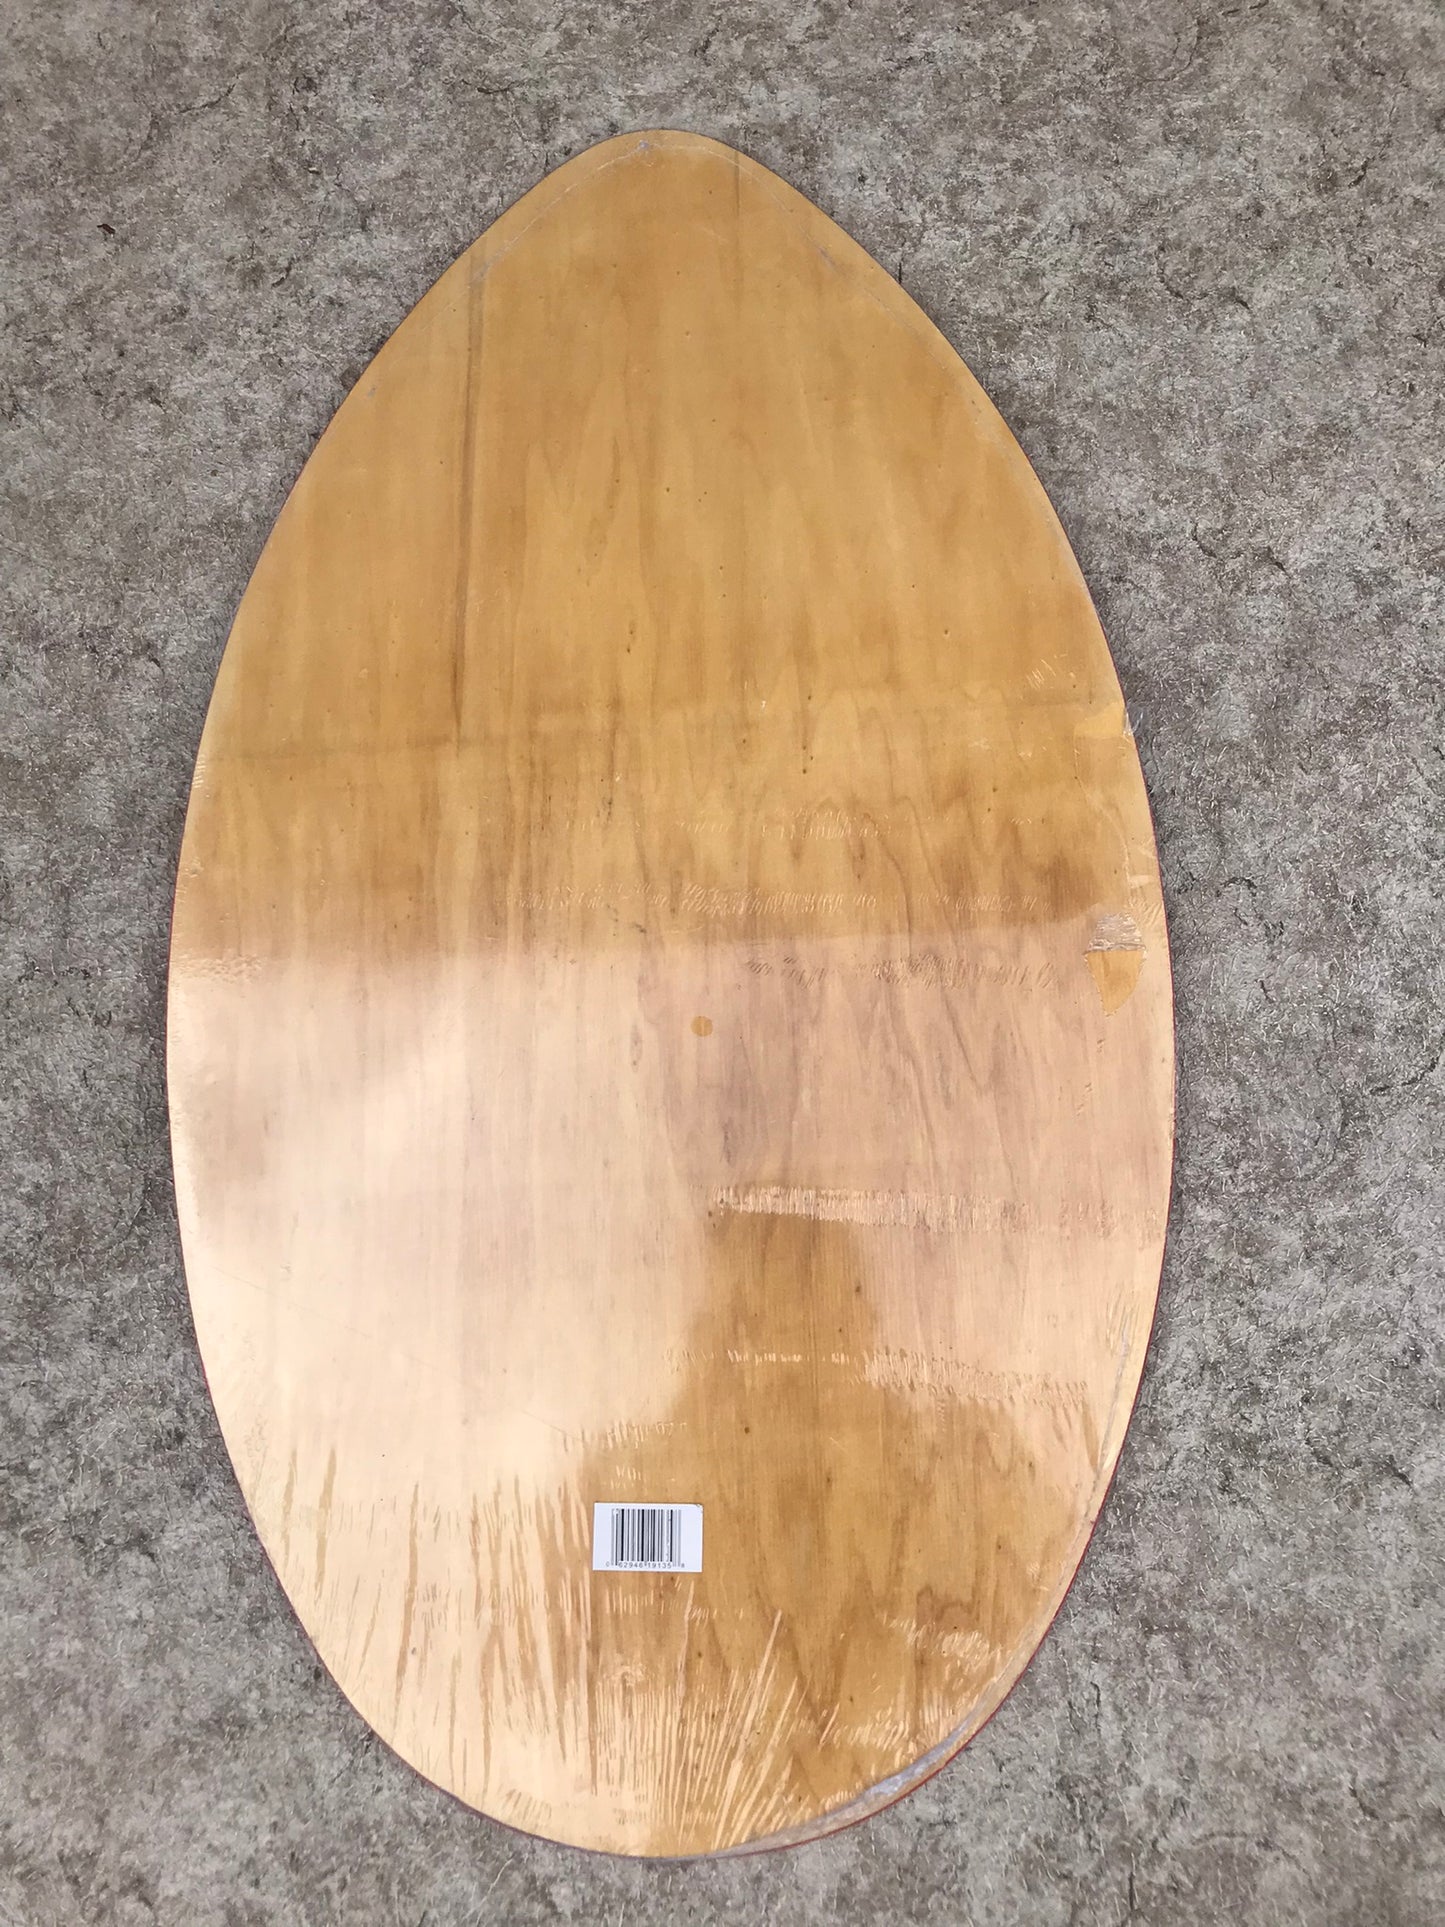 Surf SkimBoard Wood  Red Black Yellow  New Sealed  35 x 20 inch